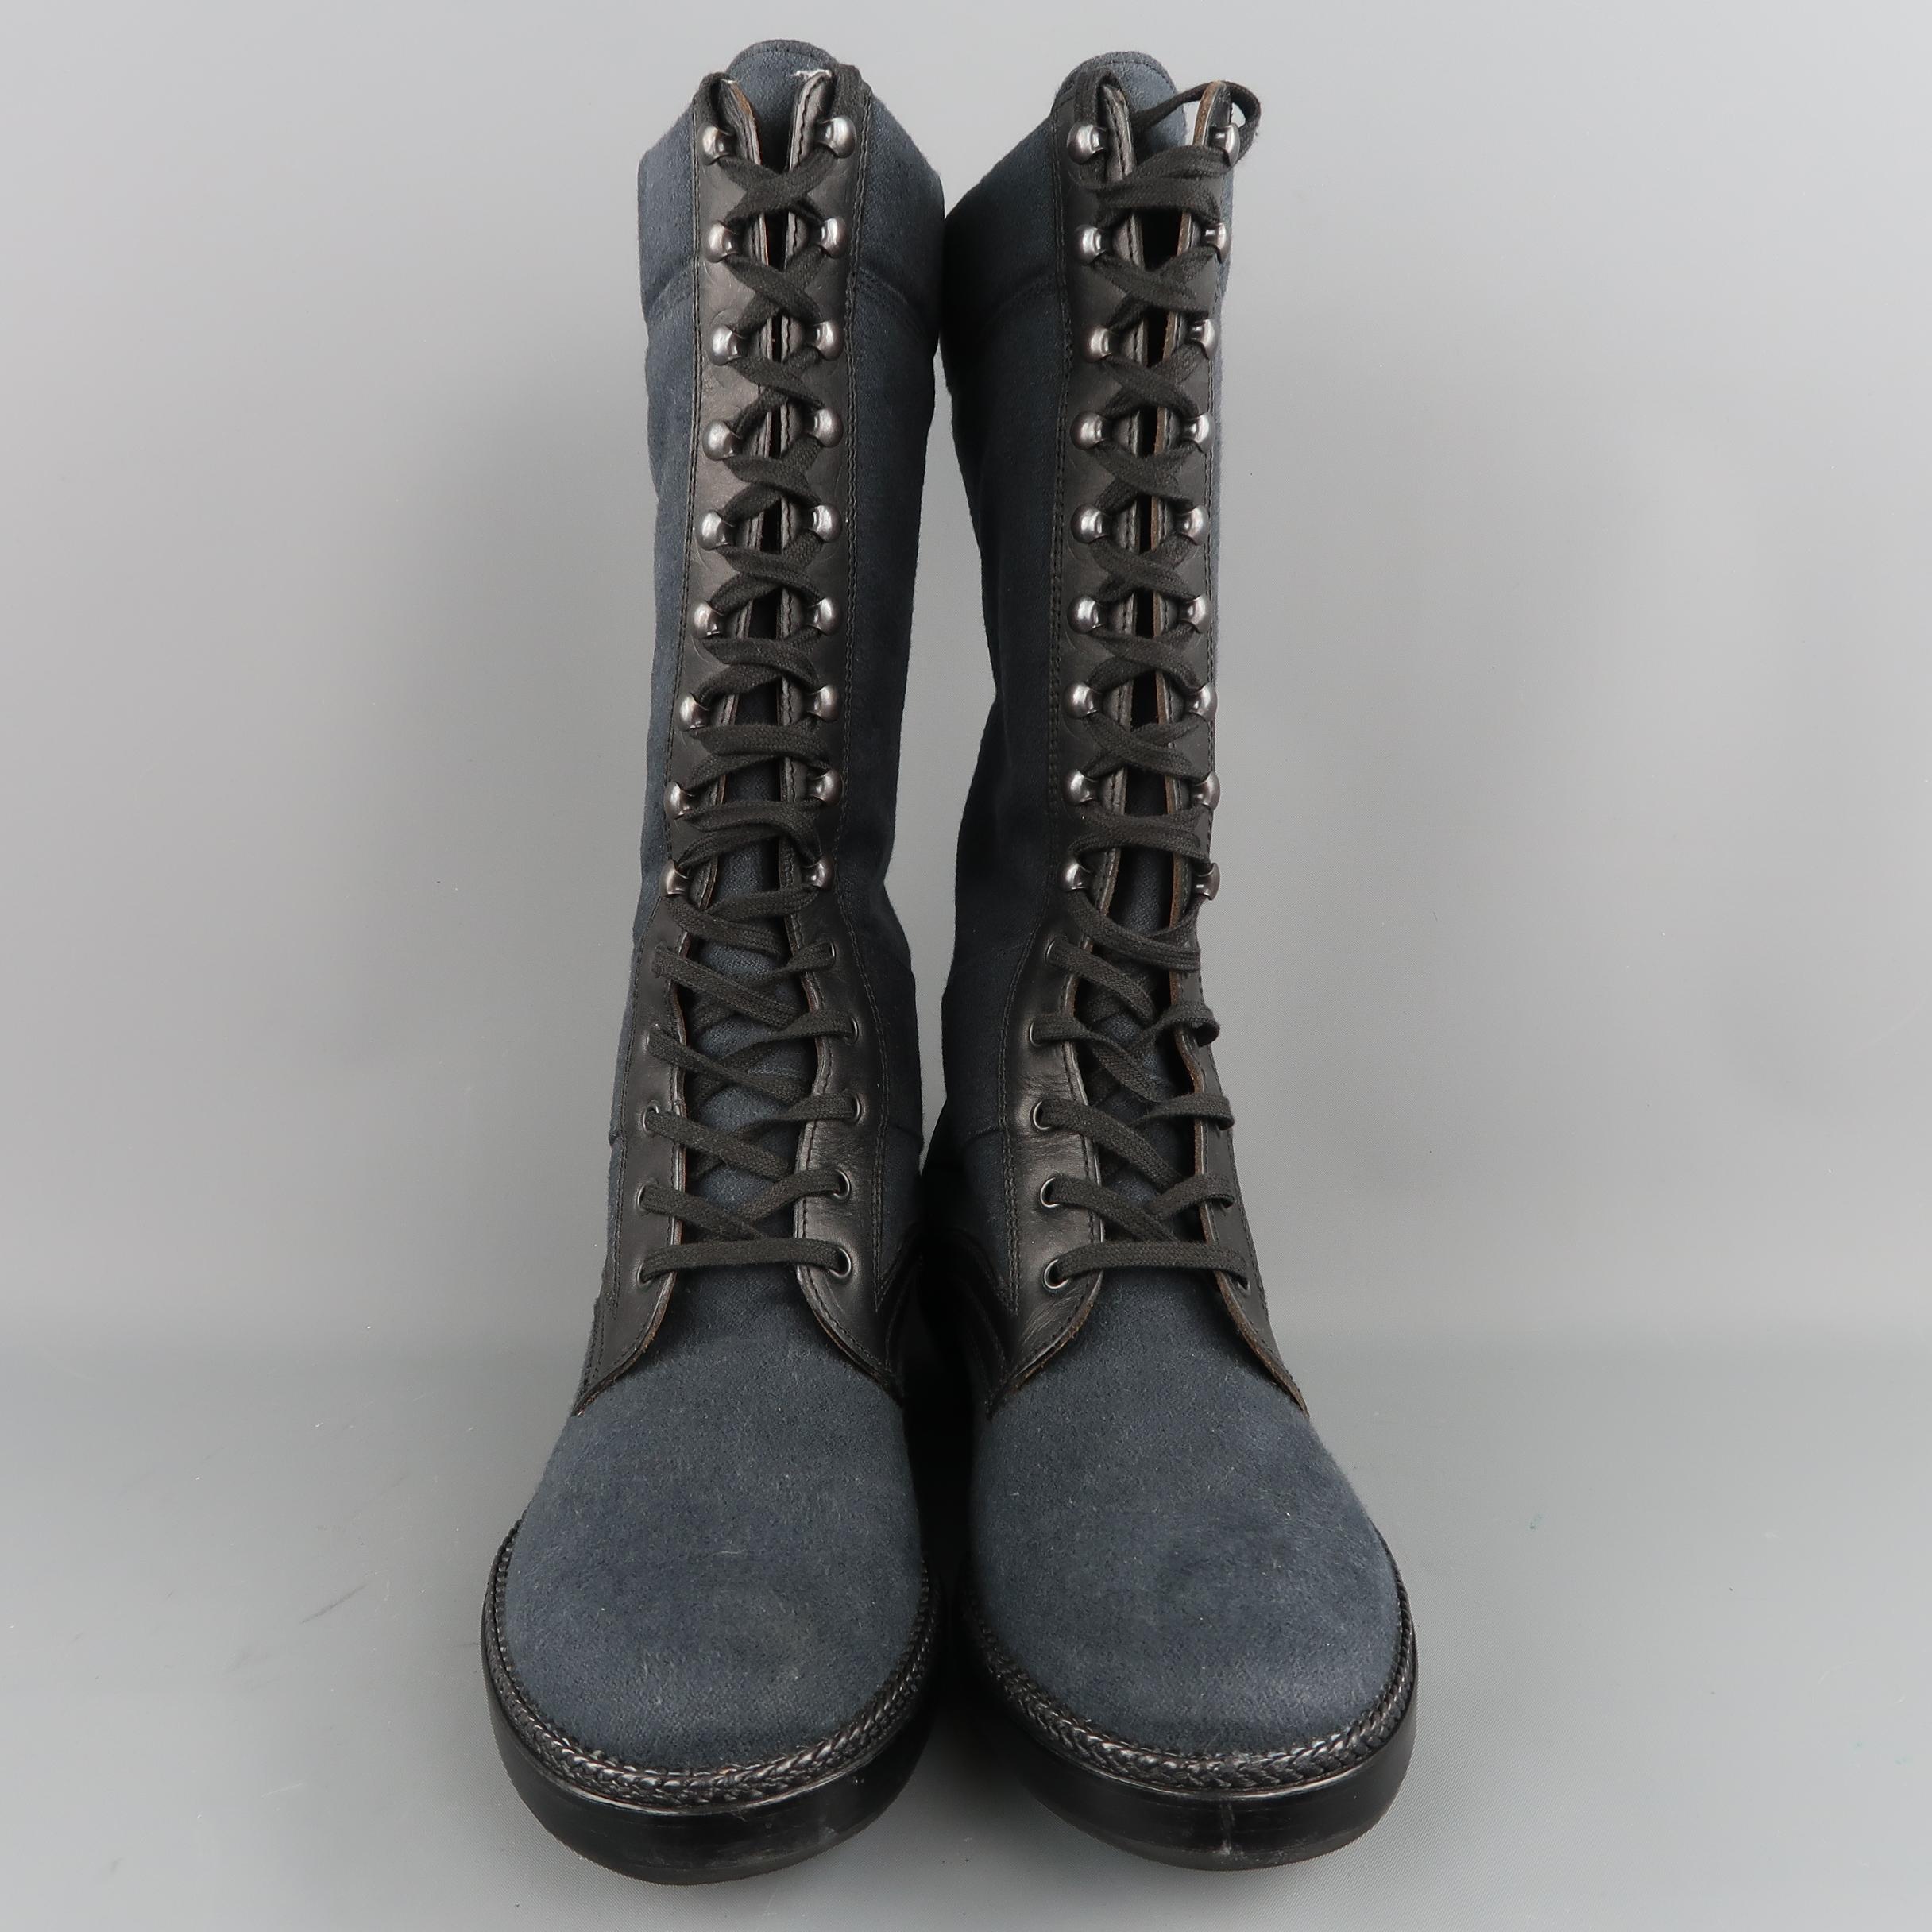 Men's LANVIN Size 9 Navy and Black Canvas and Leather Calf High Boots ...